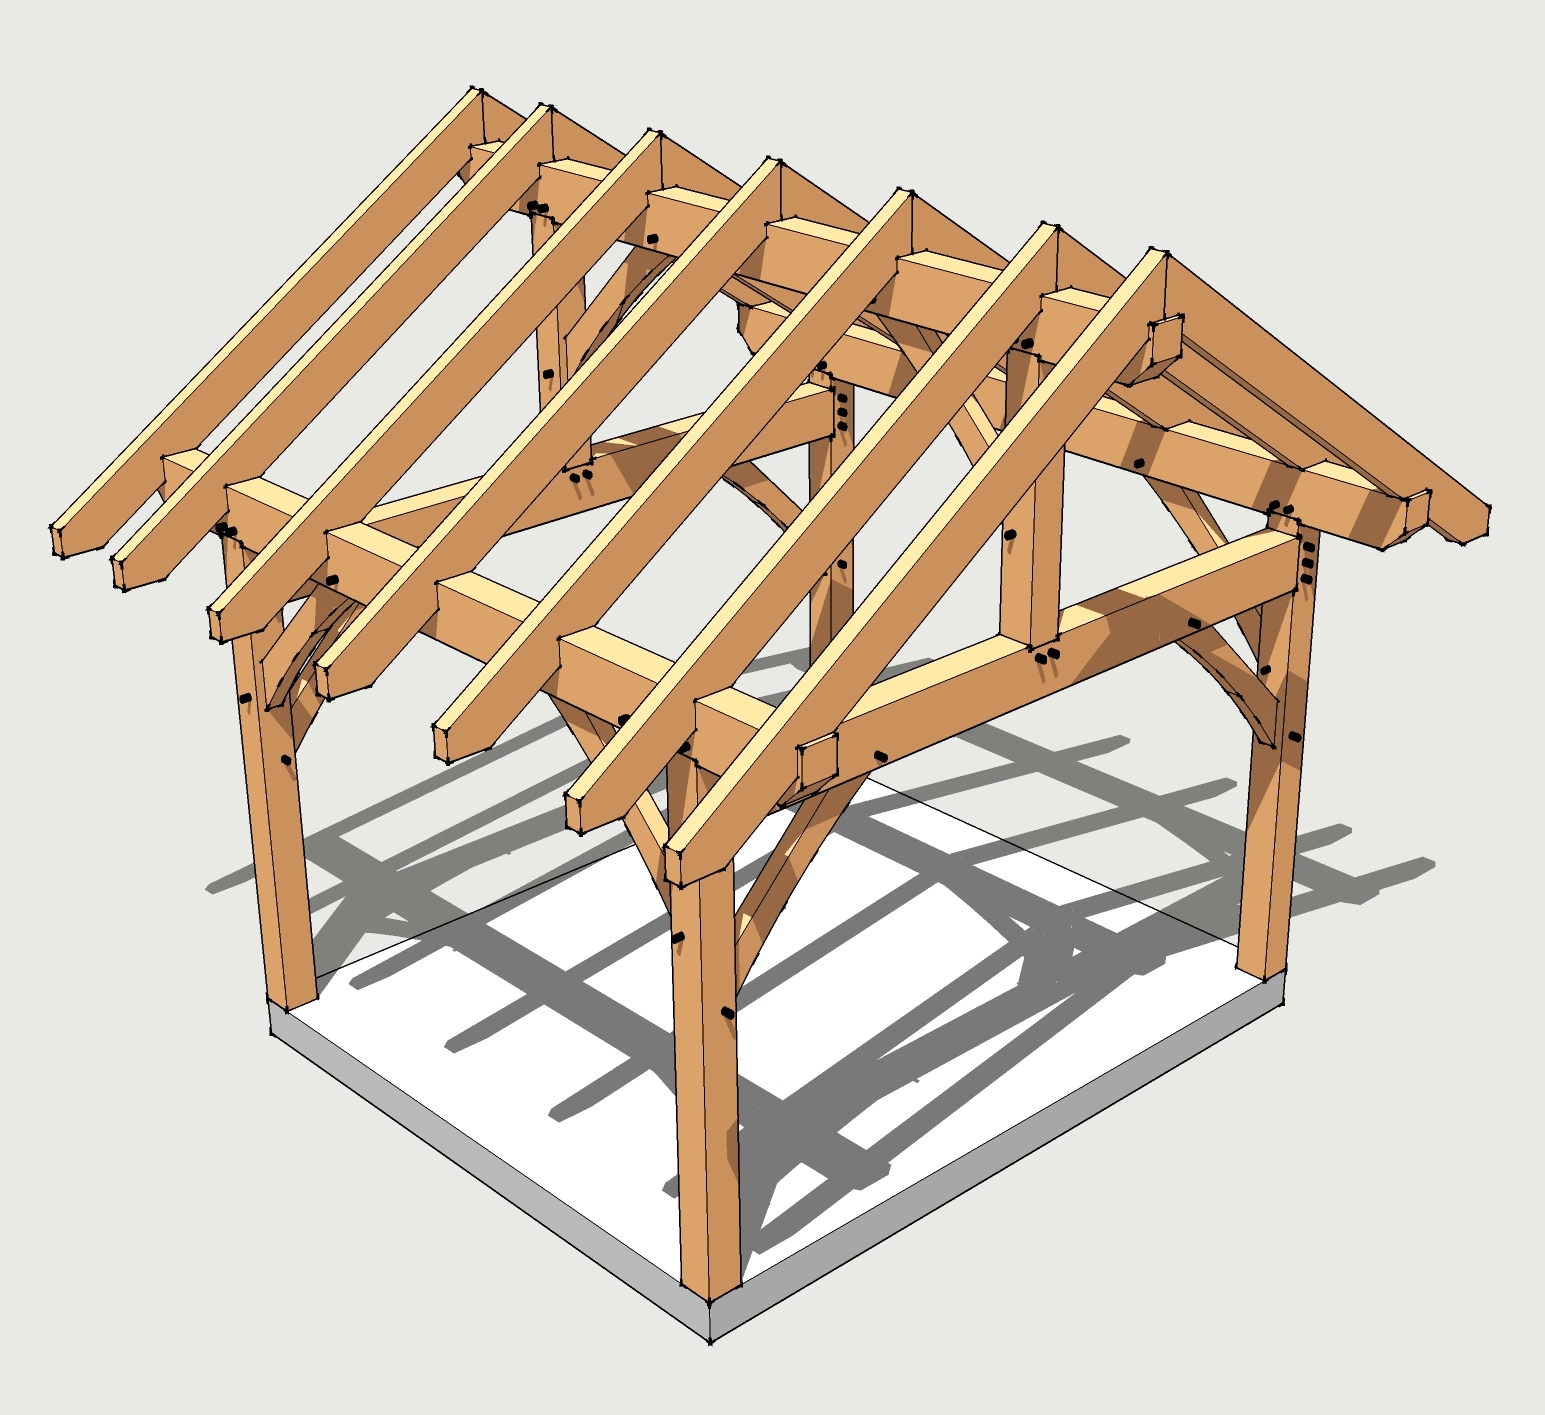 Timber Frame Kits and Plans